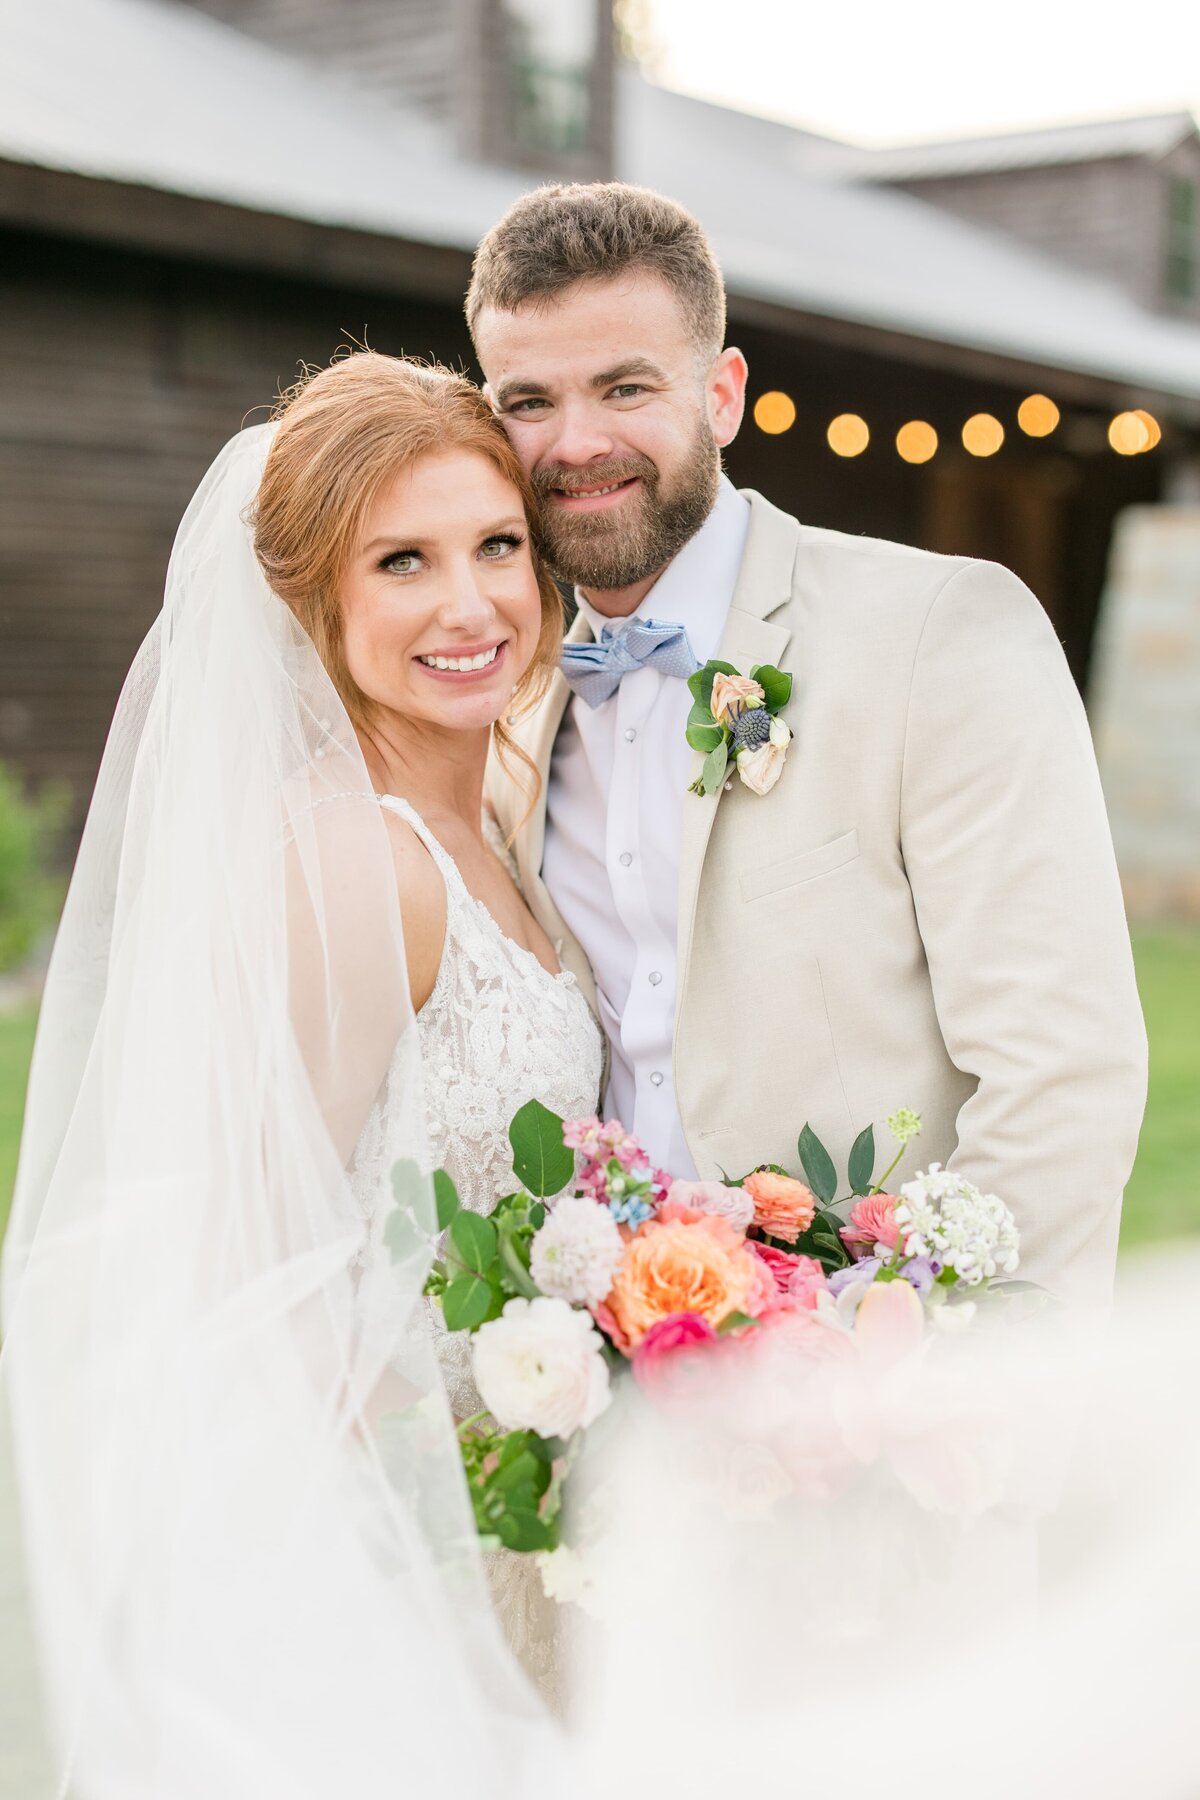 katie_and_alec_wedding_photography_wedding_videography_birmingham_alabama_husband_and_wife_team_photo_video_weddings_engagement_engagements_light_airy_focused_on_marriage__barn_at_shady_lane_wedding_21